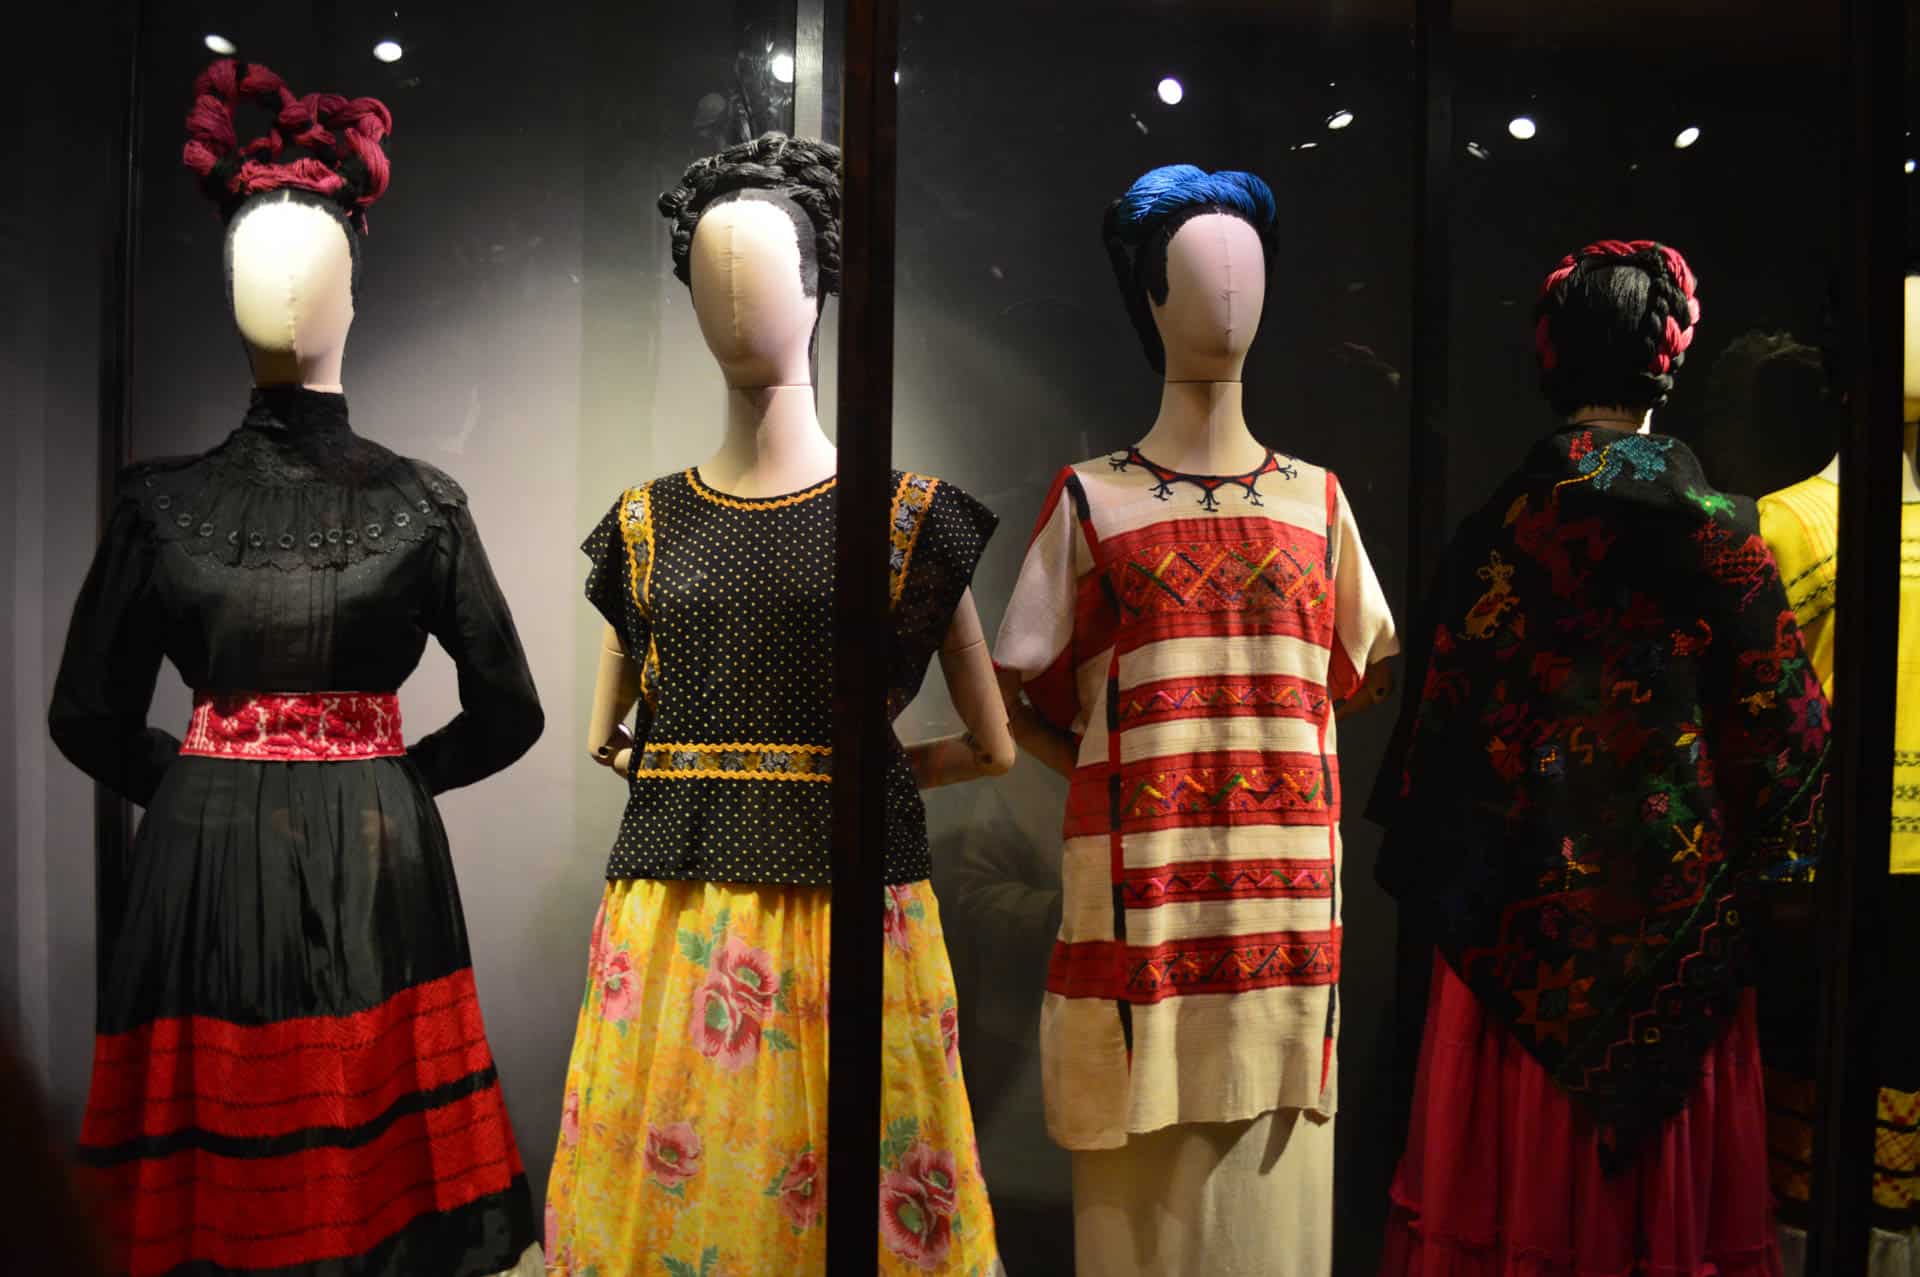 Mannequins on display wearing old, vintage clothing in what seems to be a museum